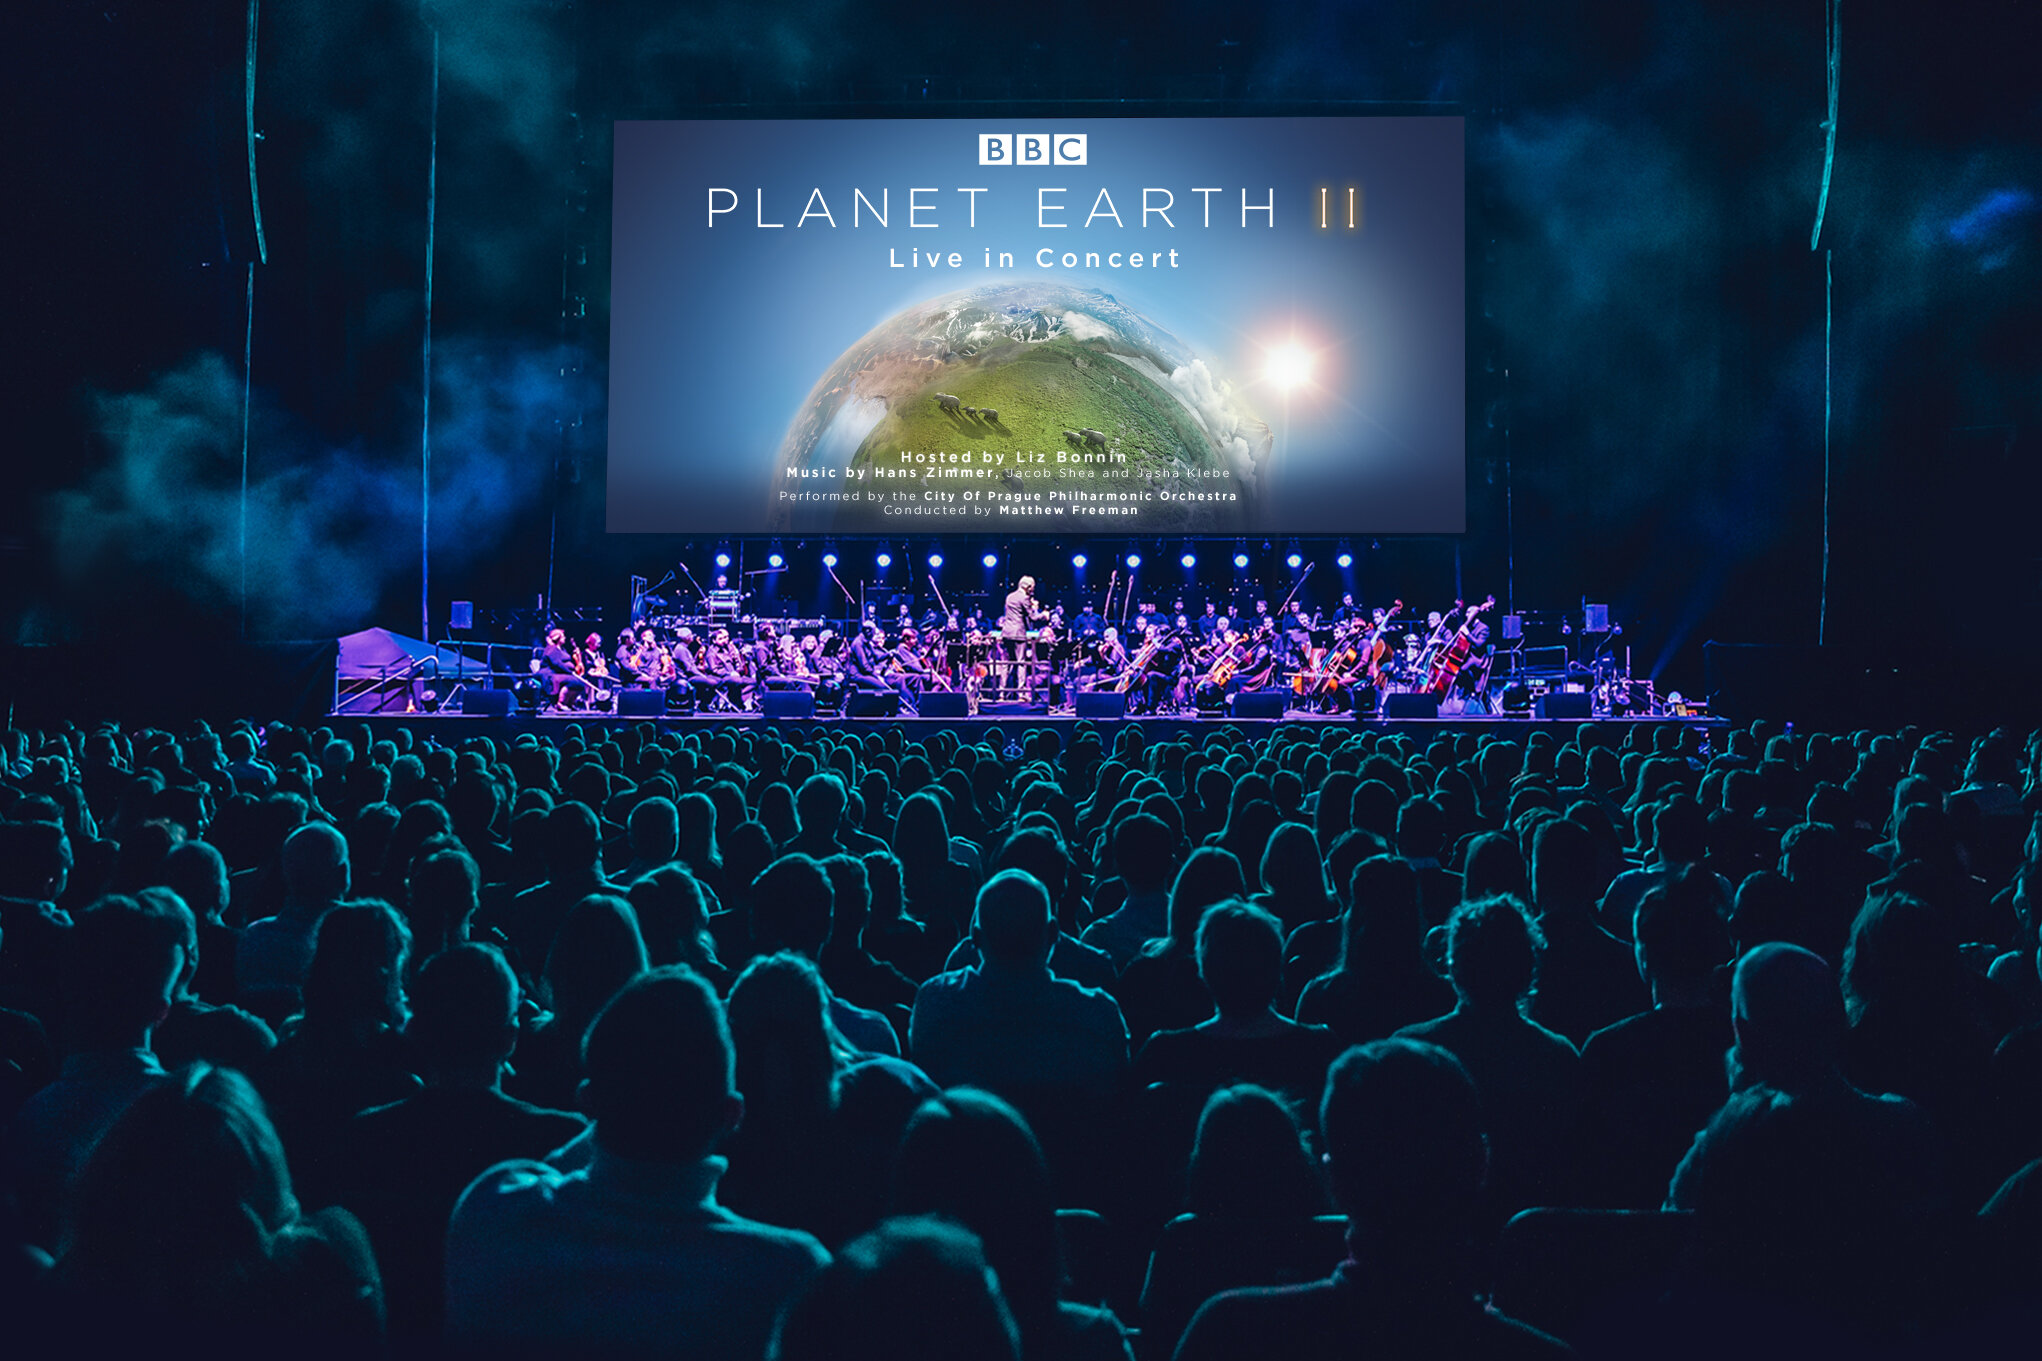 Planet Earth Press Picture Arena 2019 Iconic Poster.jpg